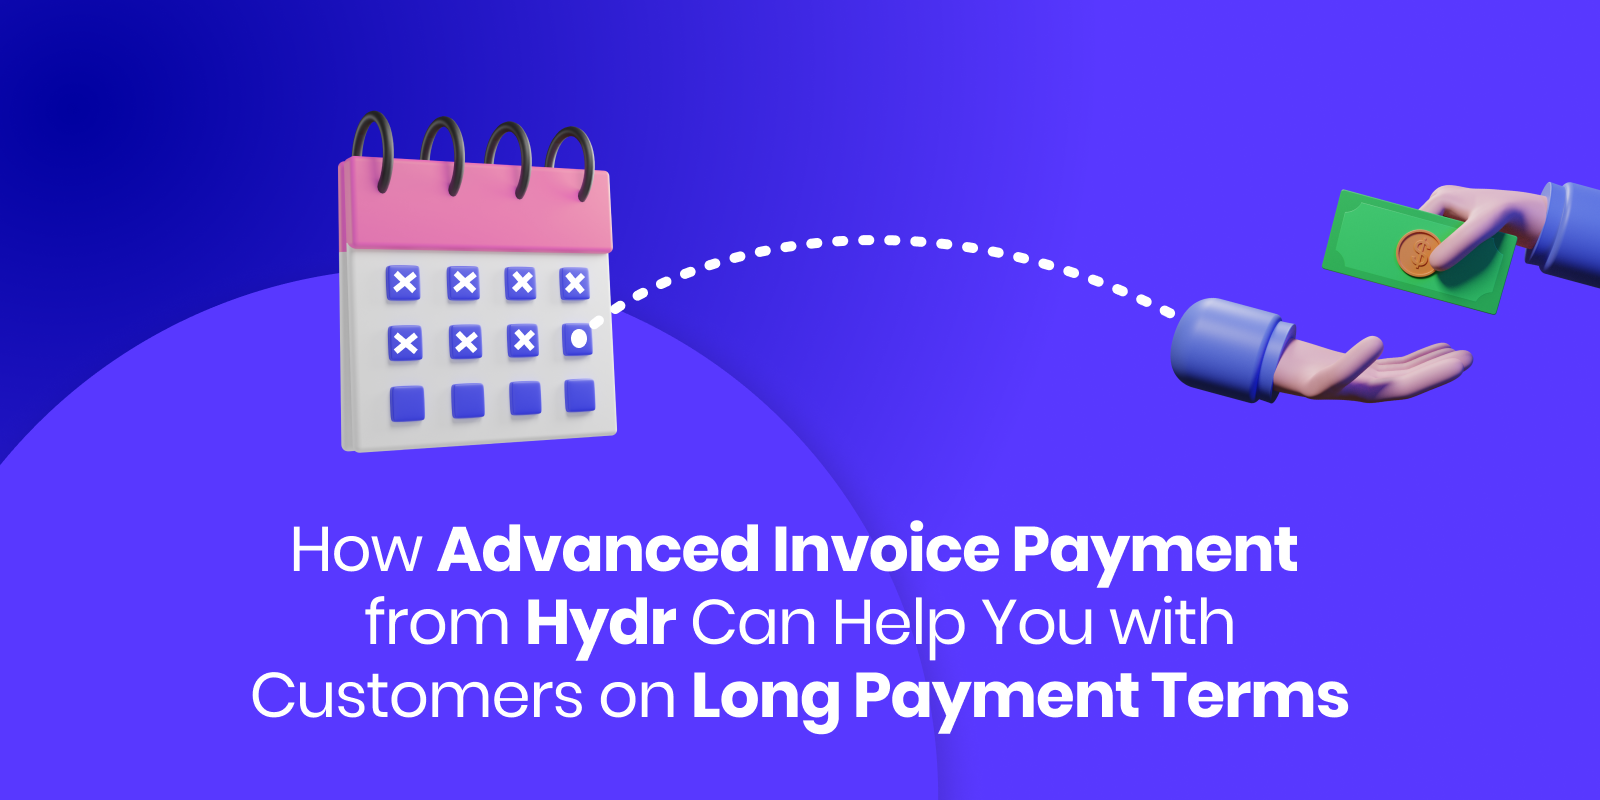 Advanced Invoice Payment from Hydr - Blog